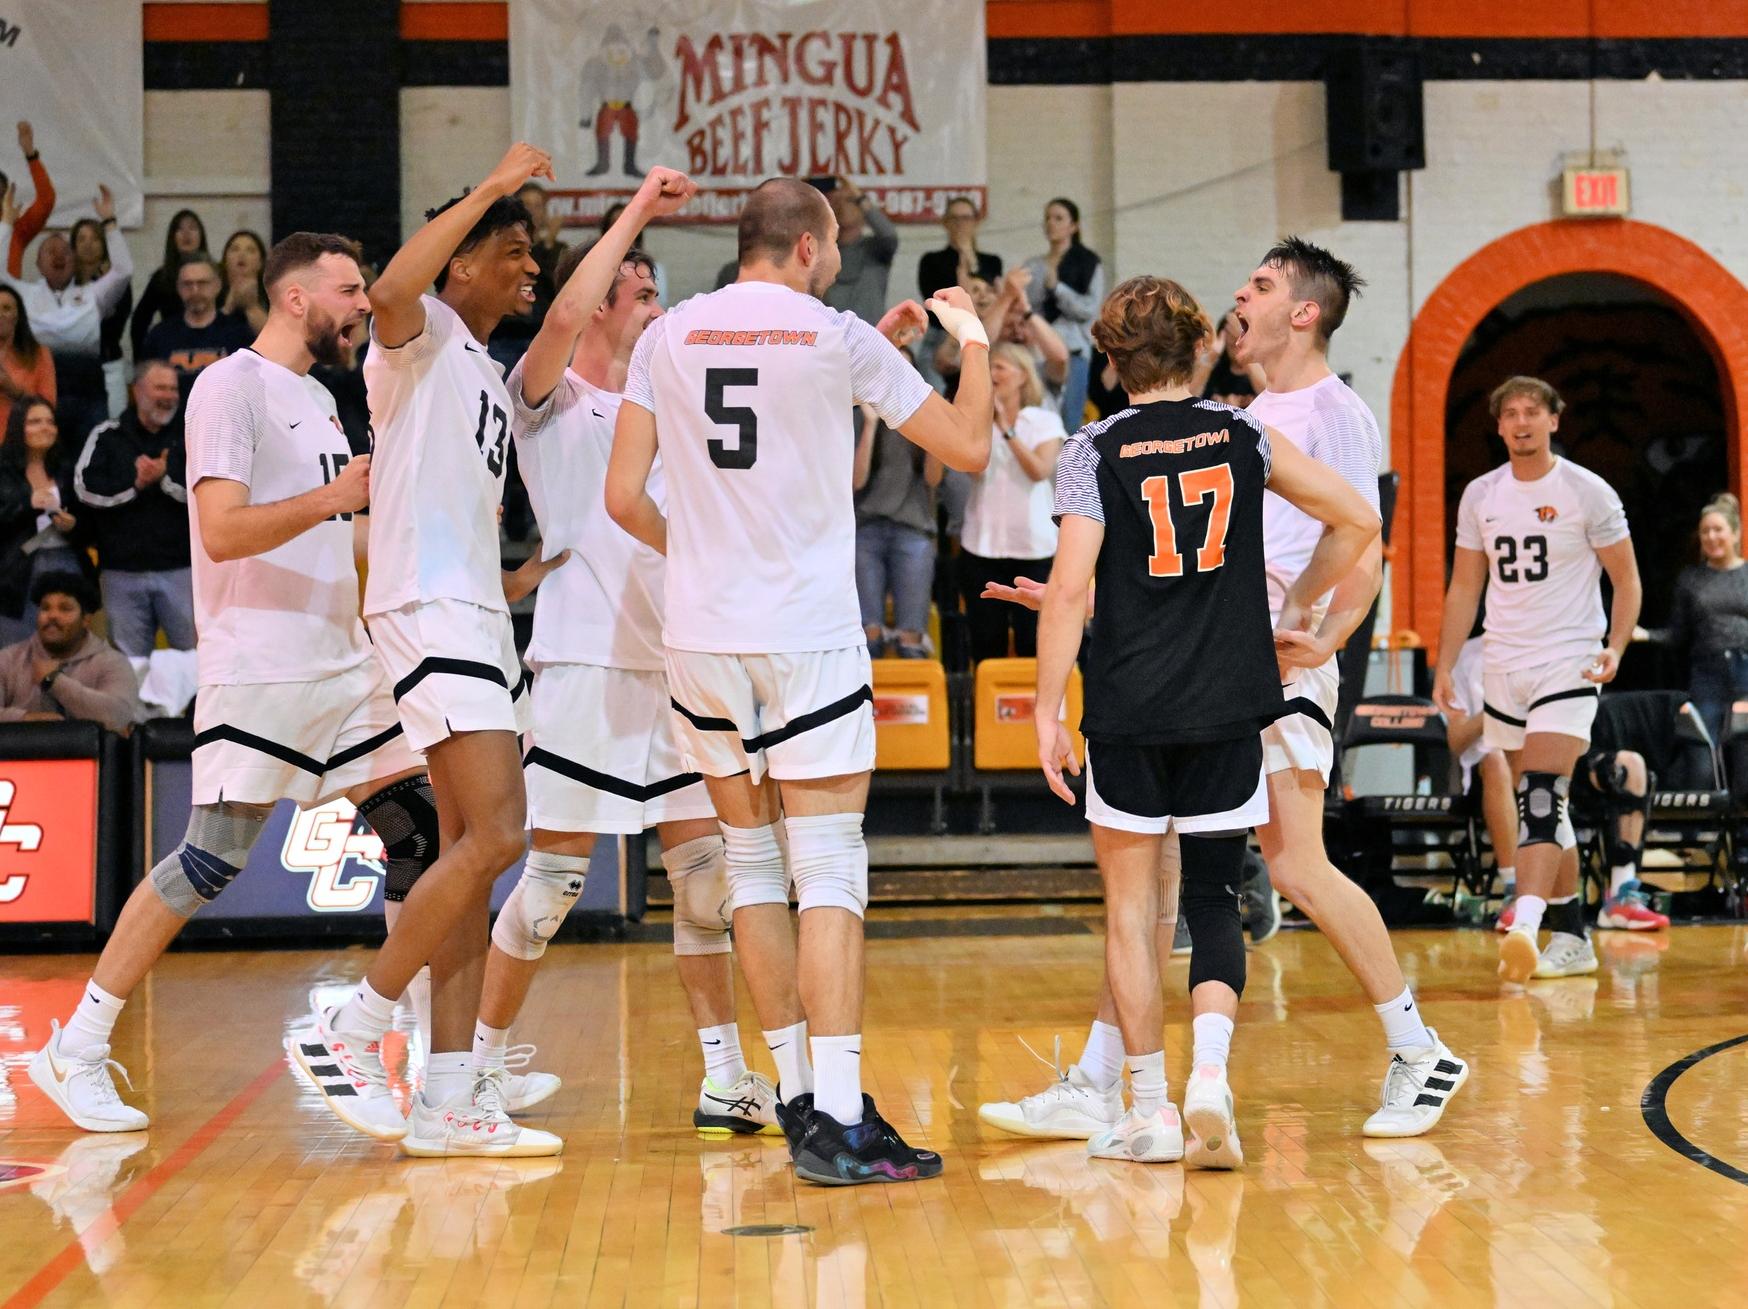 Tigers advance to Semifinals for 1st time after instant classic